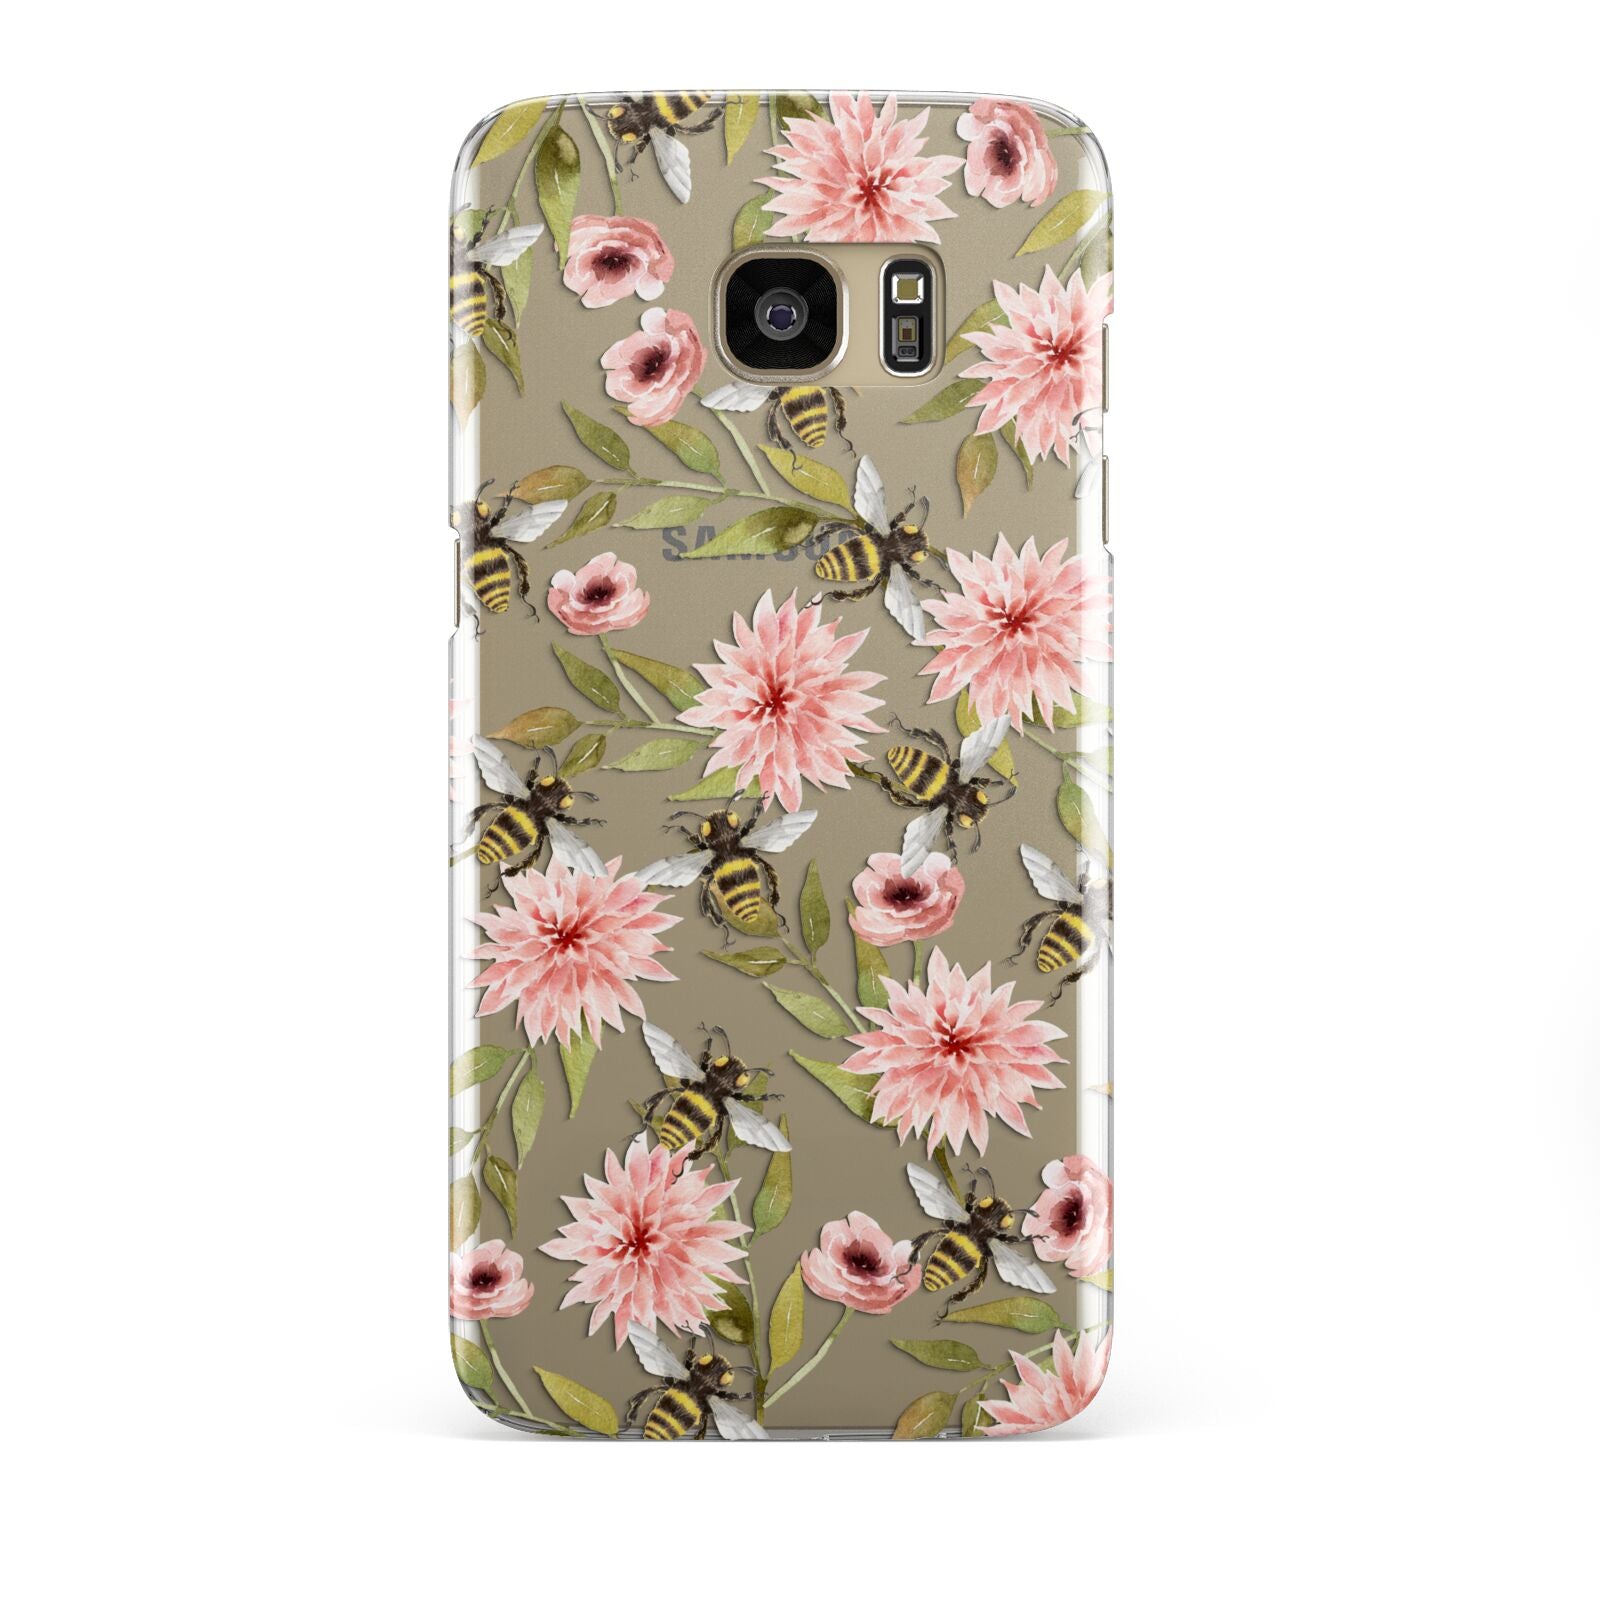 Pink Flowers and Bees Samsung Galaxy S7 Edge Case